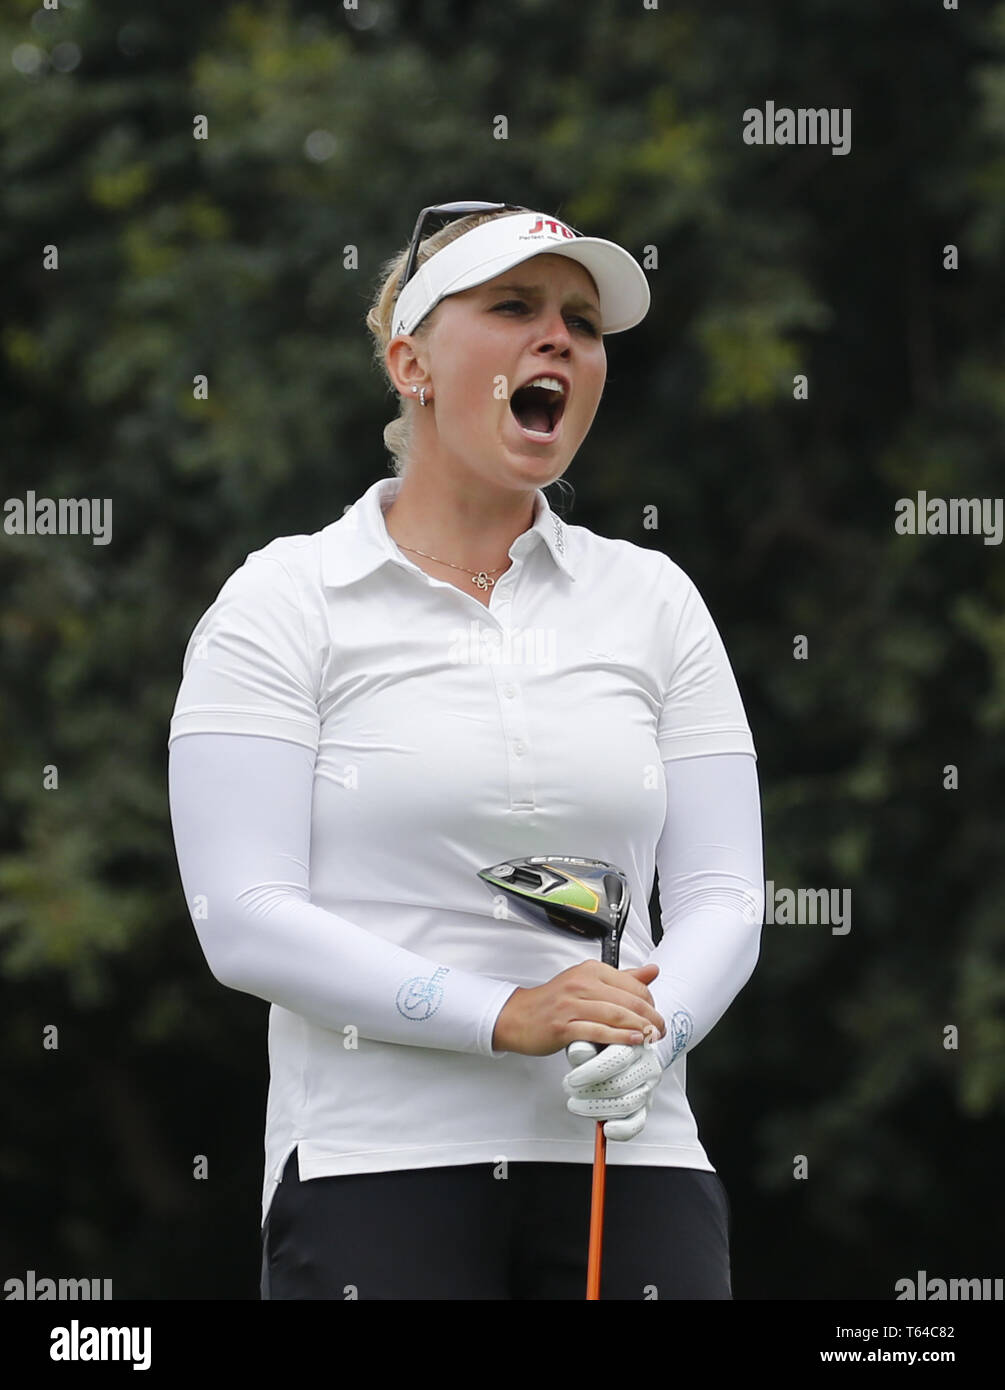 Los Angeles, California, USA. 28th Apr, 2019. Nanna Koerstz Madsen of  Denmark in actions during the final round of the HUGEL-AIR PREMIA LA Open  LPGA golf tournament at Wilshire Country on April